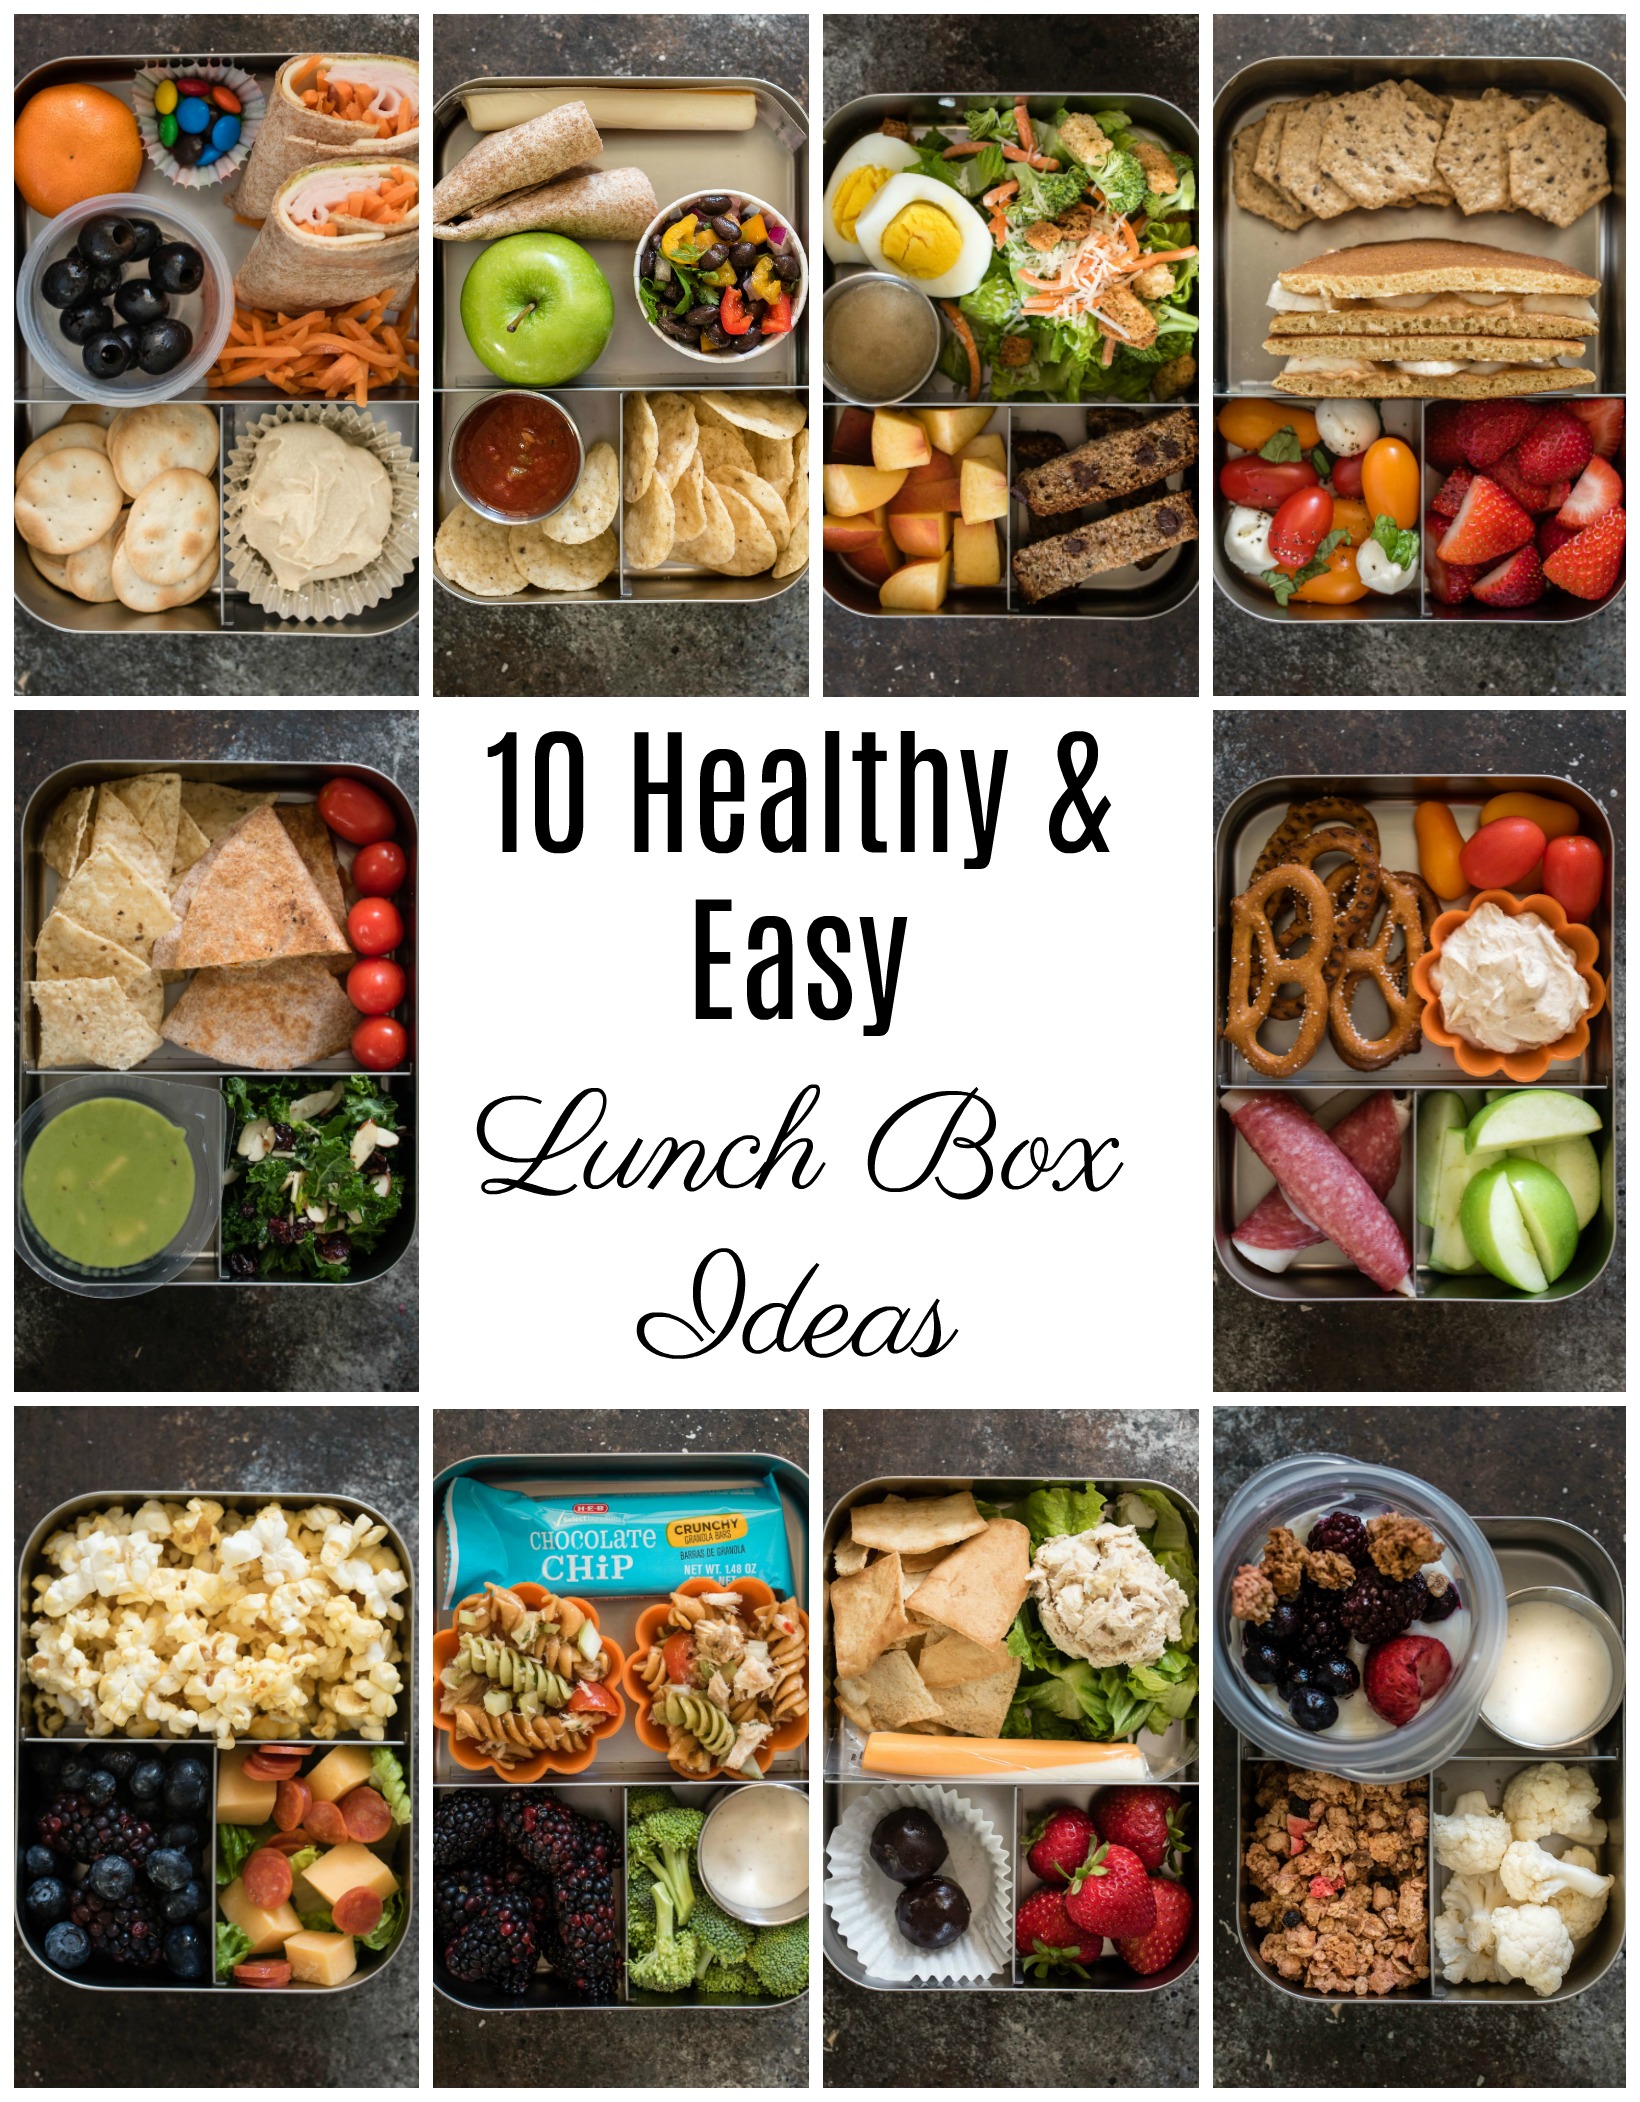 http://www.nutritiouseats.com/wp-content/uploads/2017/08/Healthy-Lunch-Box-Ideas.jpg